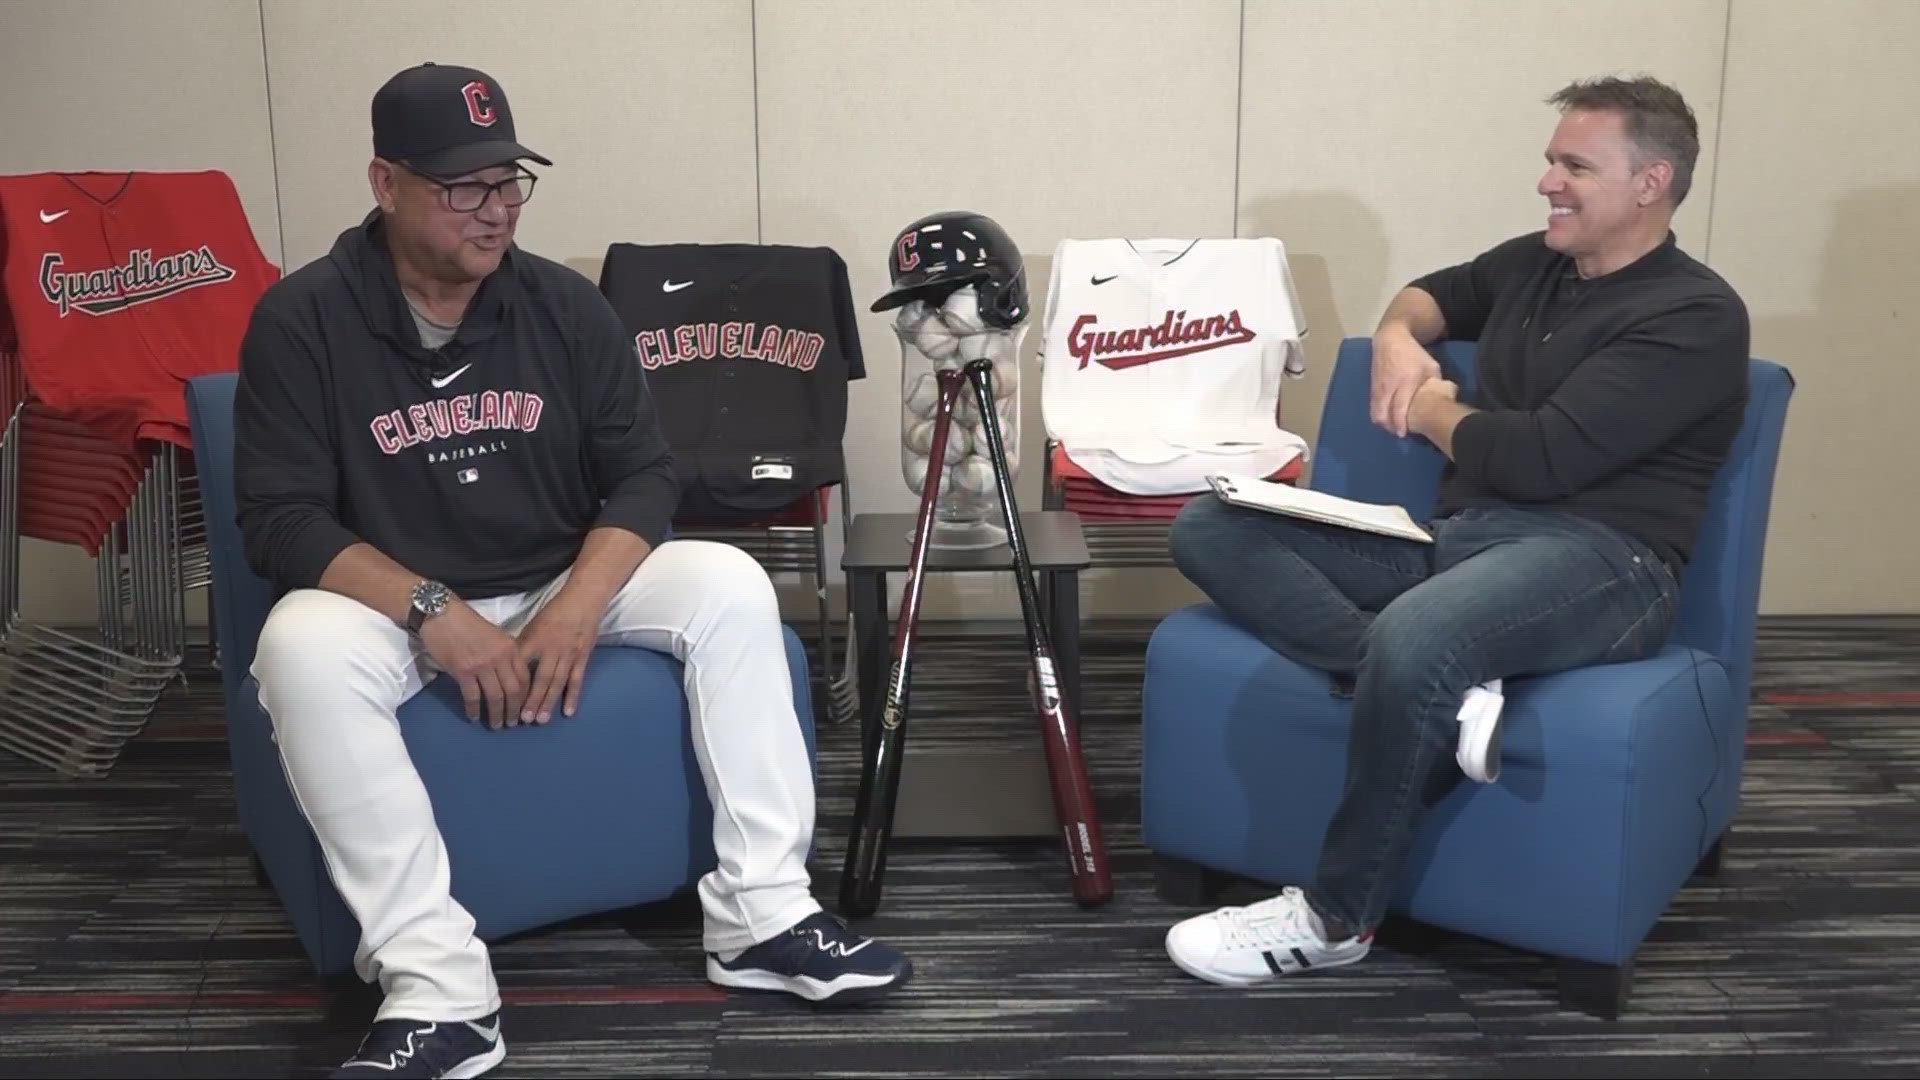 In the latest edition of Beyond the Dugout, Terry Francona sits down with Jay Crawford to discuss first jobs, high school crushes and his favorite food in Cleveland.